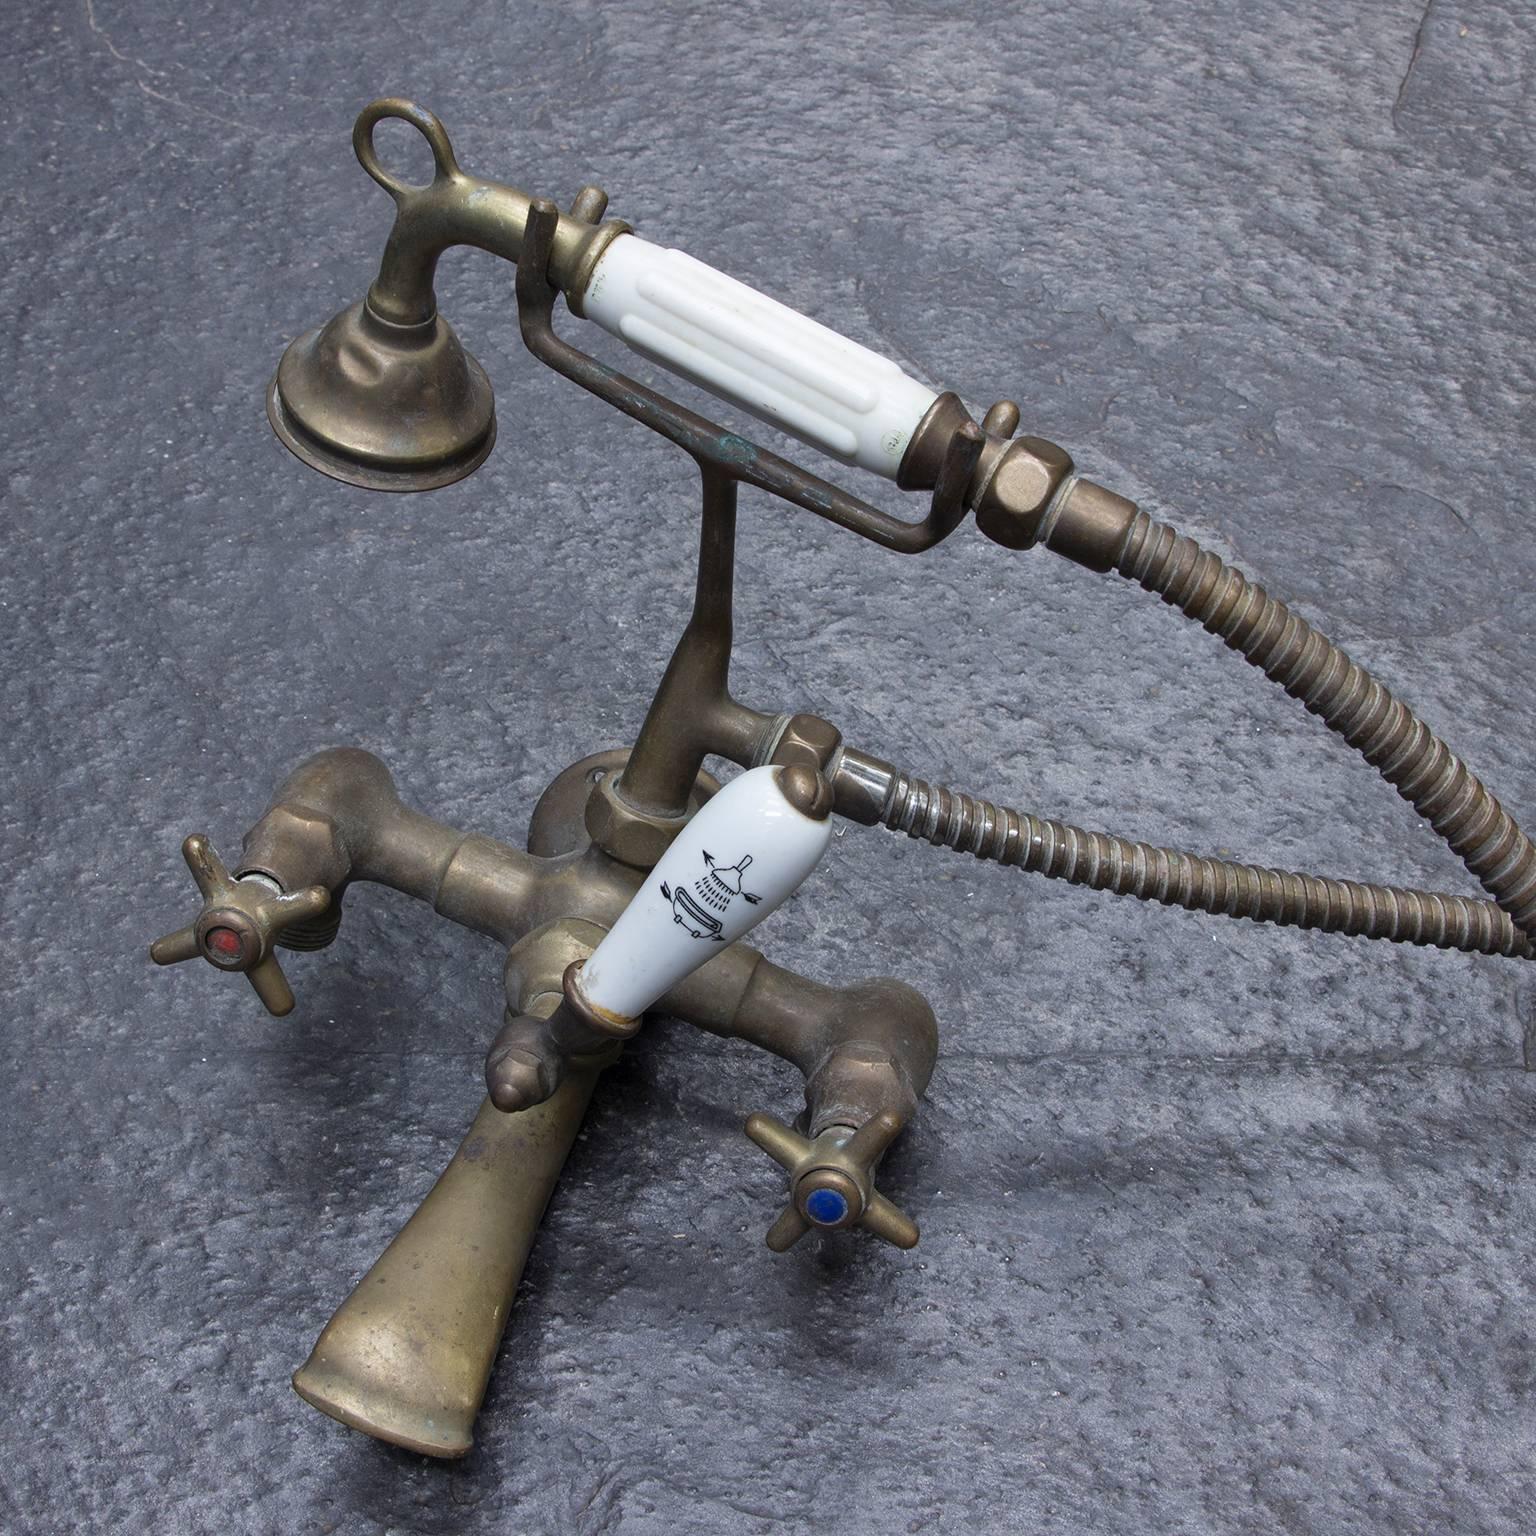 Cupper shower set. Traces of wear but this contributes to its beauty. 

Measure: Weight 3.5 kg

From the outer left side (of the tap) to the outer right side is 22 cm. From the top of the carrier of the shower to the bottom is 30.5 cm. 
The length